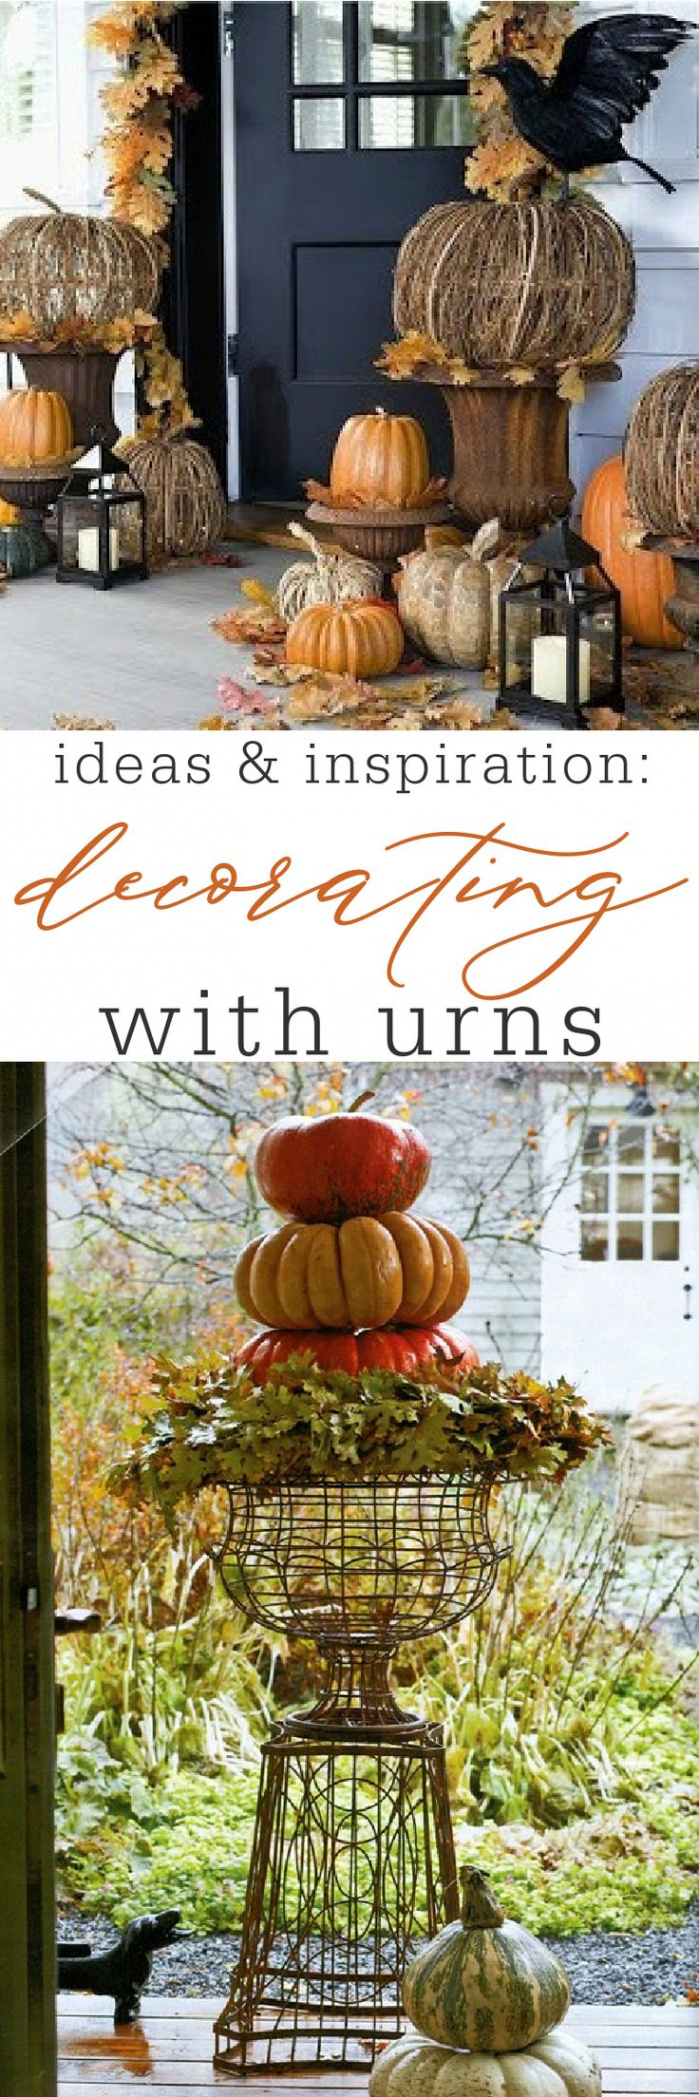 Decorating With Urns the Fall Edition  Fall decorations porch